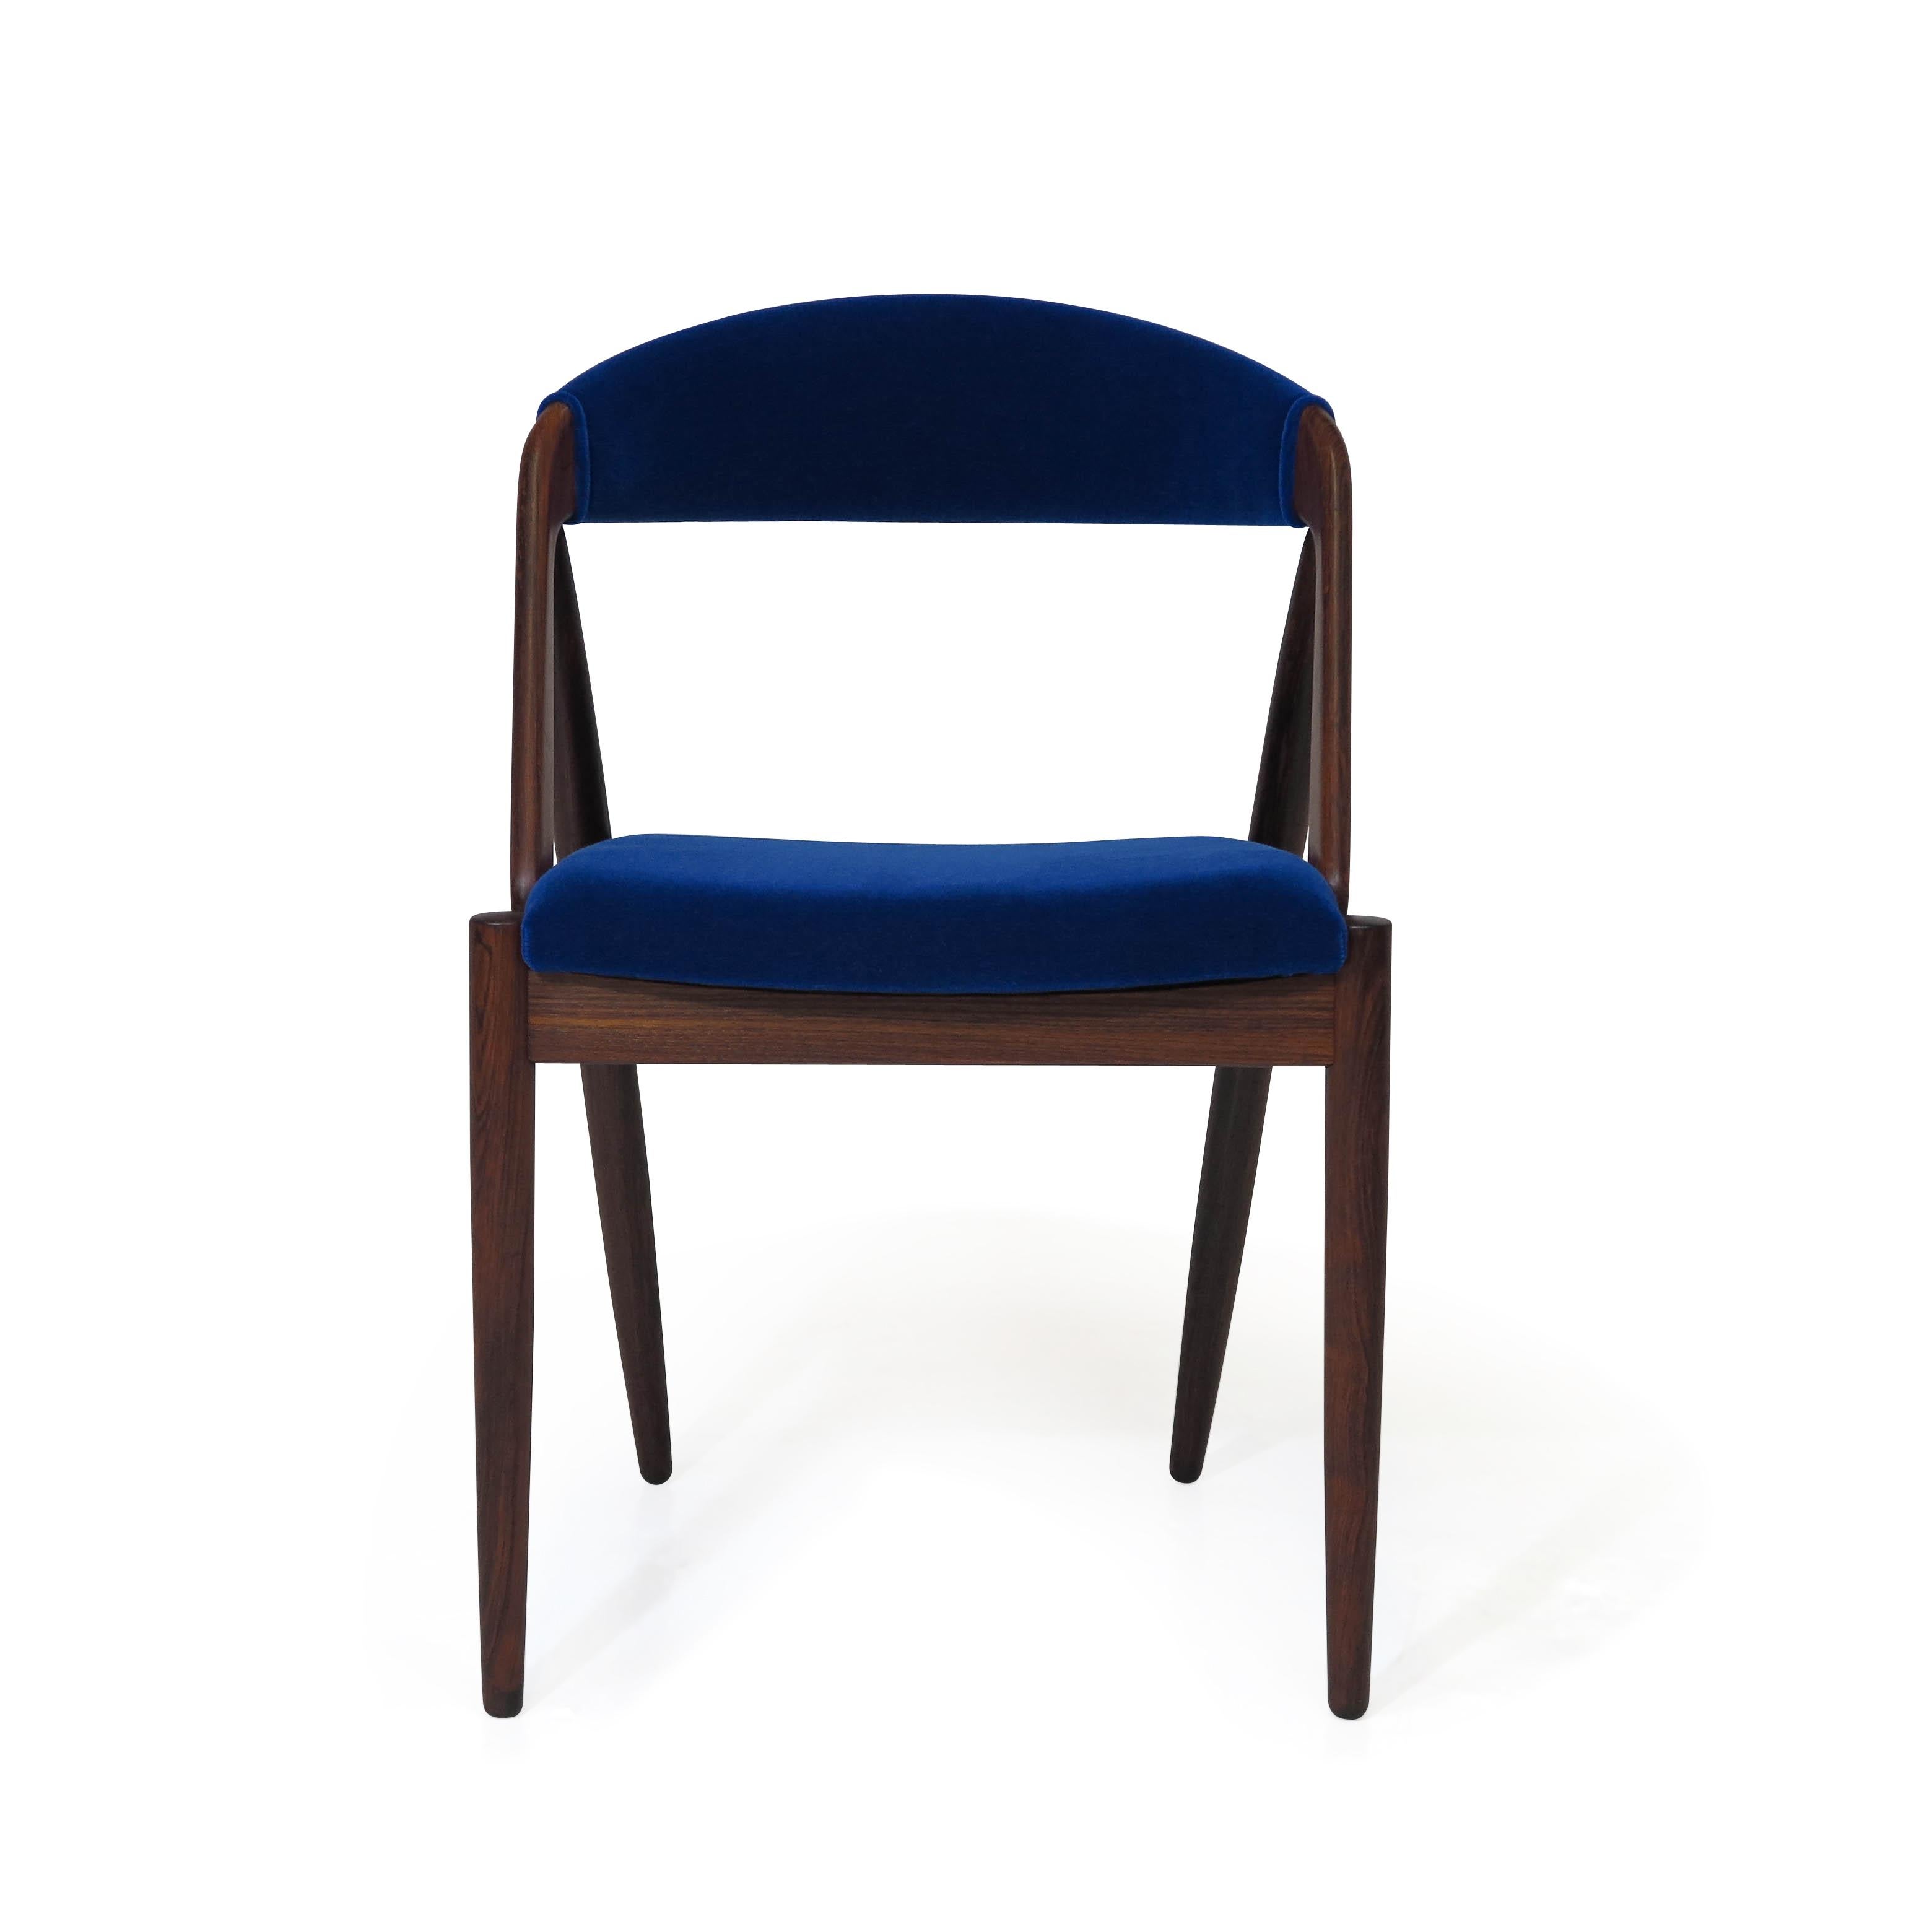 Set of four rosewood dining chairs designed by Kai Kristiansen for Schou Andersens Mobelfabrik, model 31 circa 1956 Denmark. Crafted of solid Brazilian rosewood upholstered in cobalt blue mohair. The seat frames constructed of a wood frame with